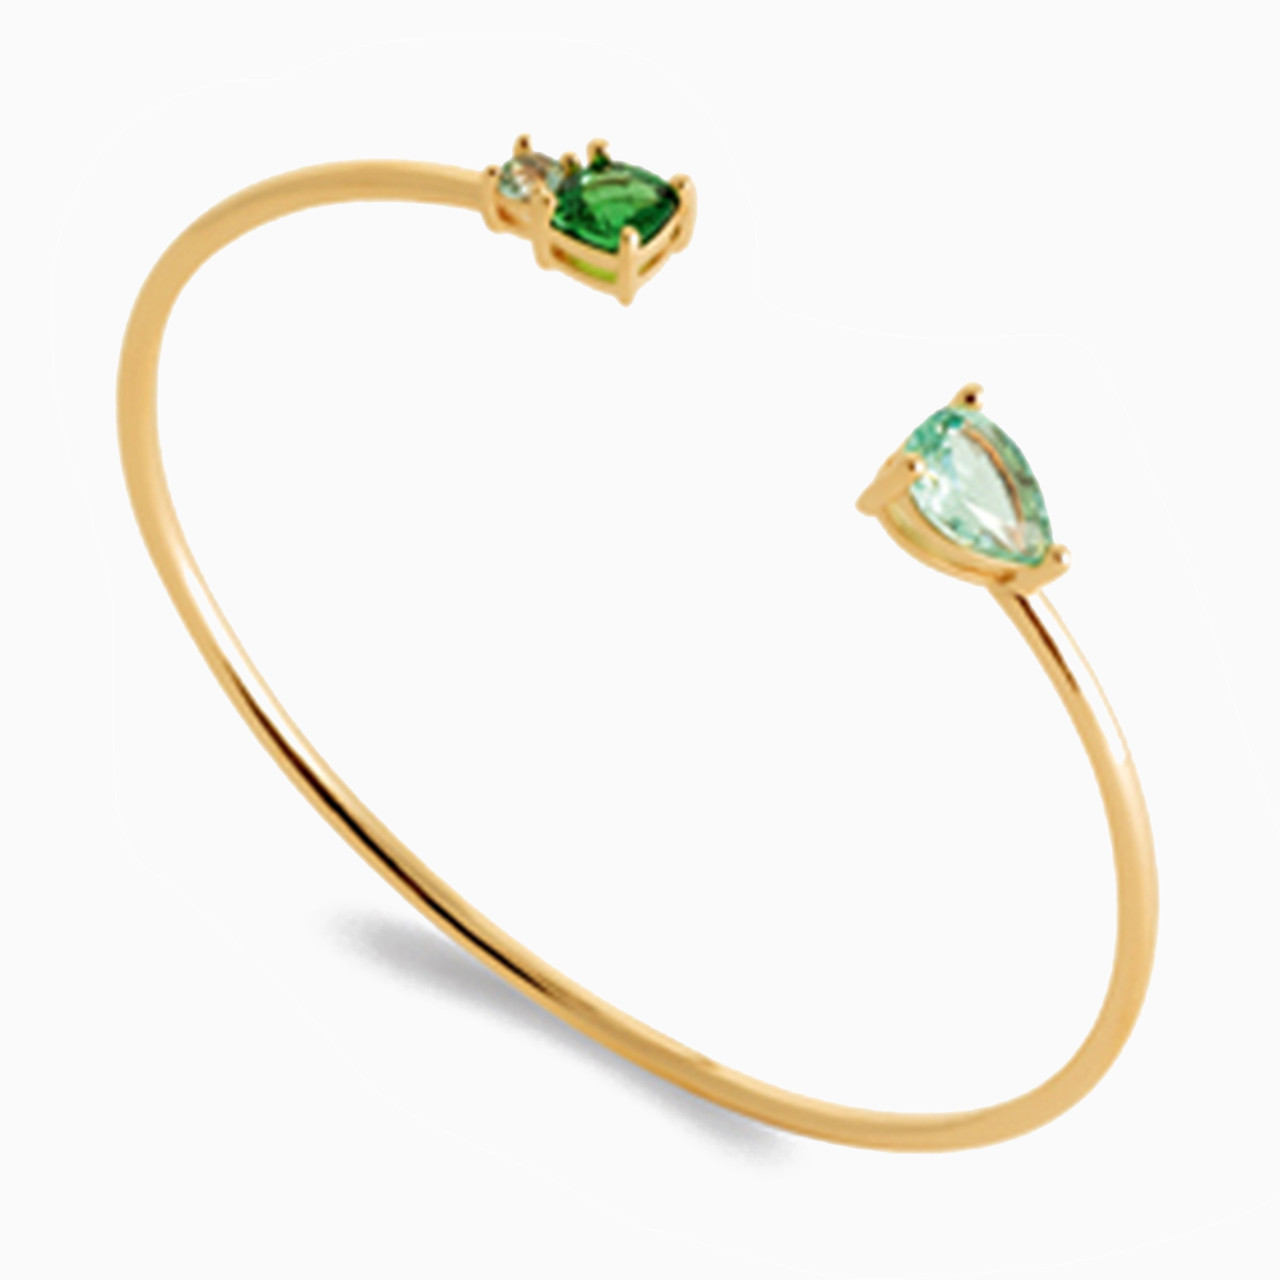 Gold Plated Colored Stones Cuff Bracelet